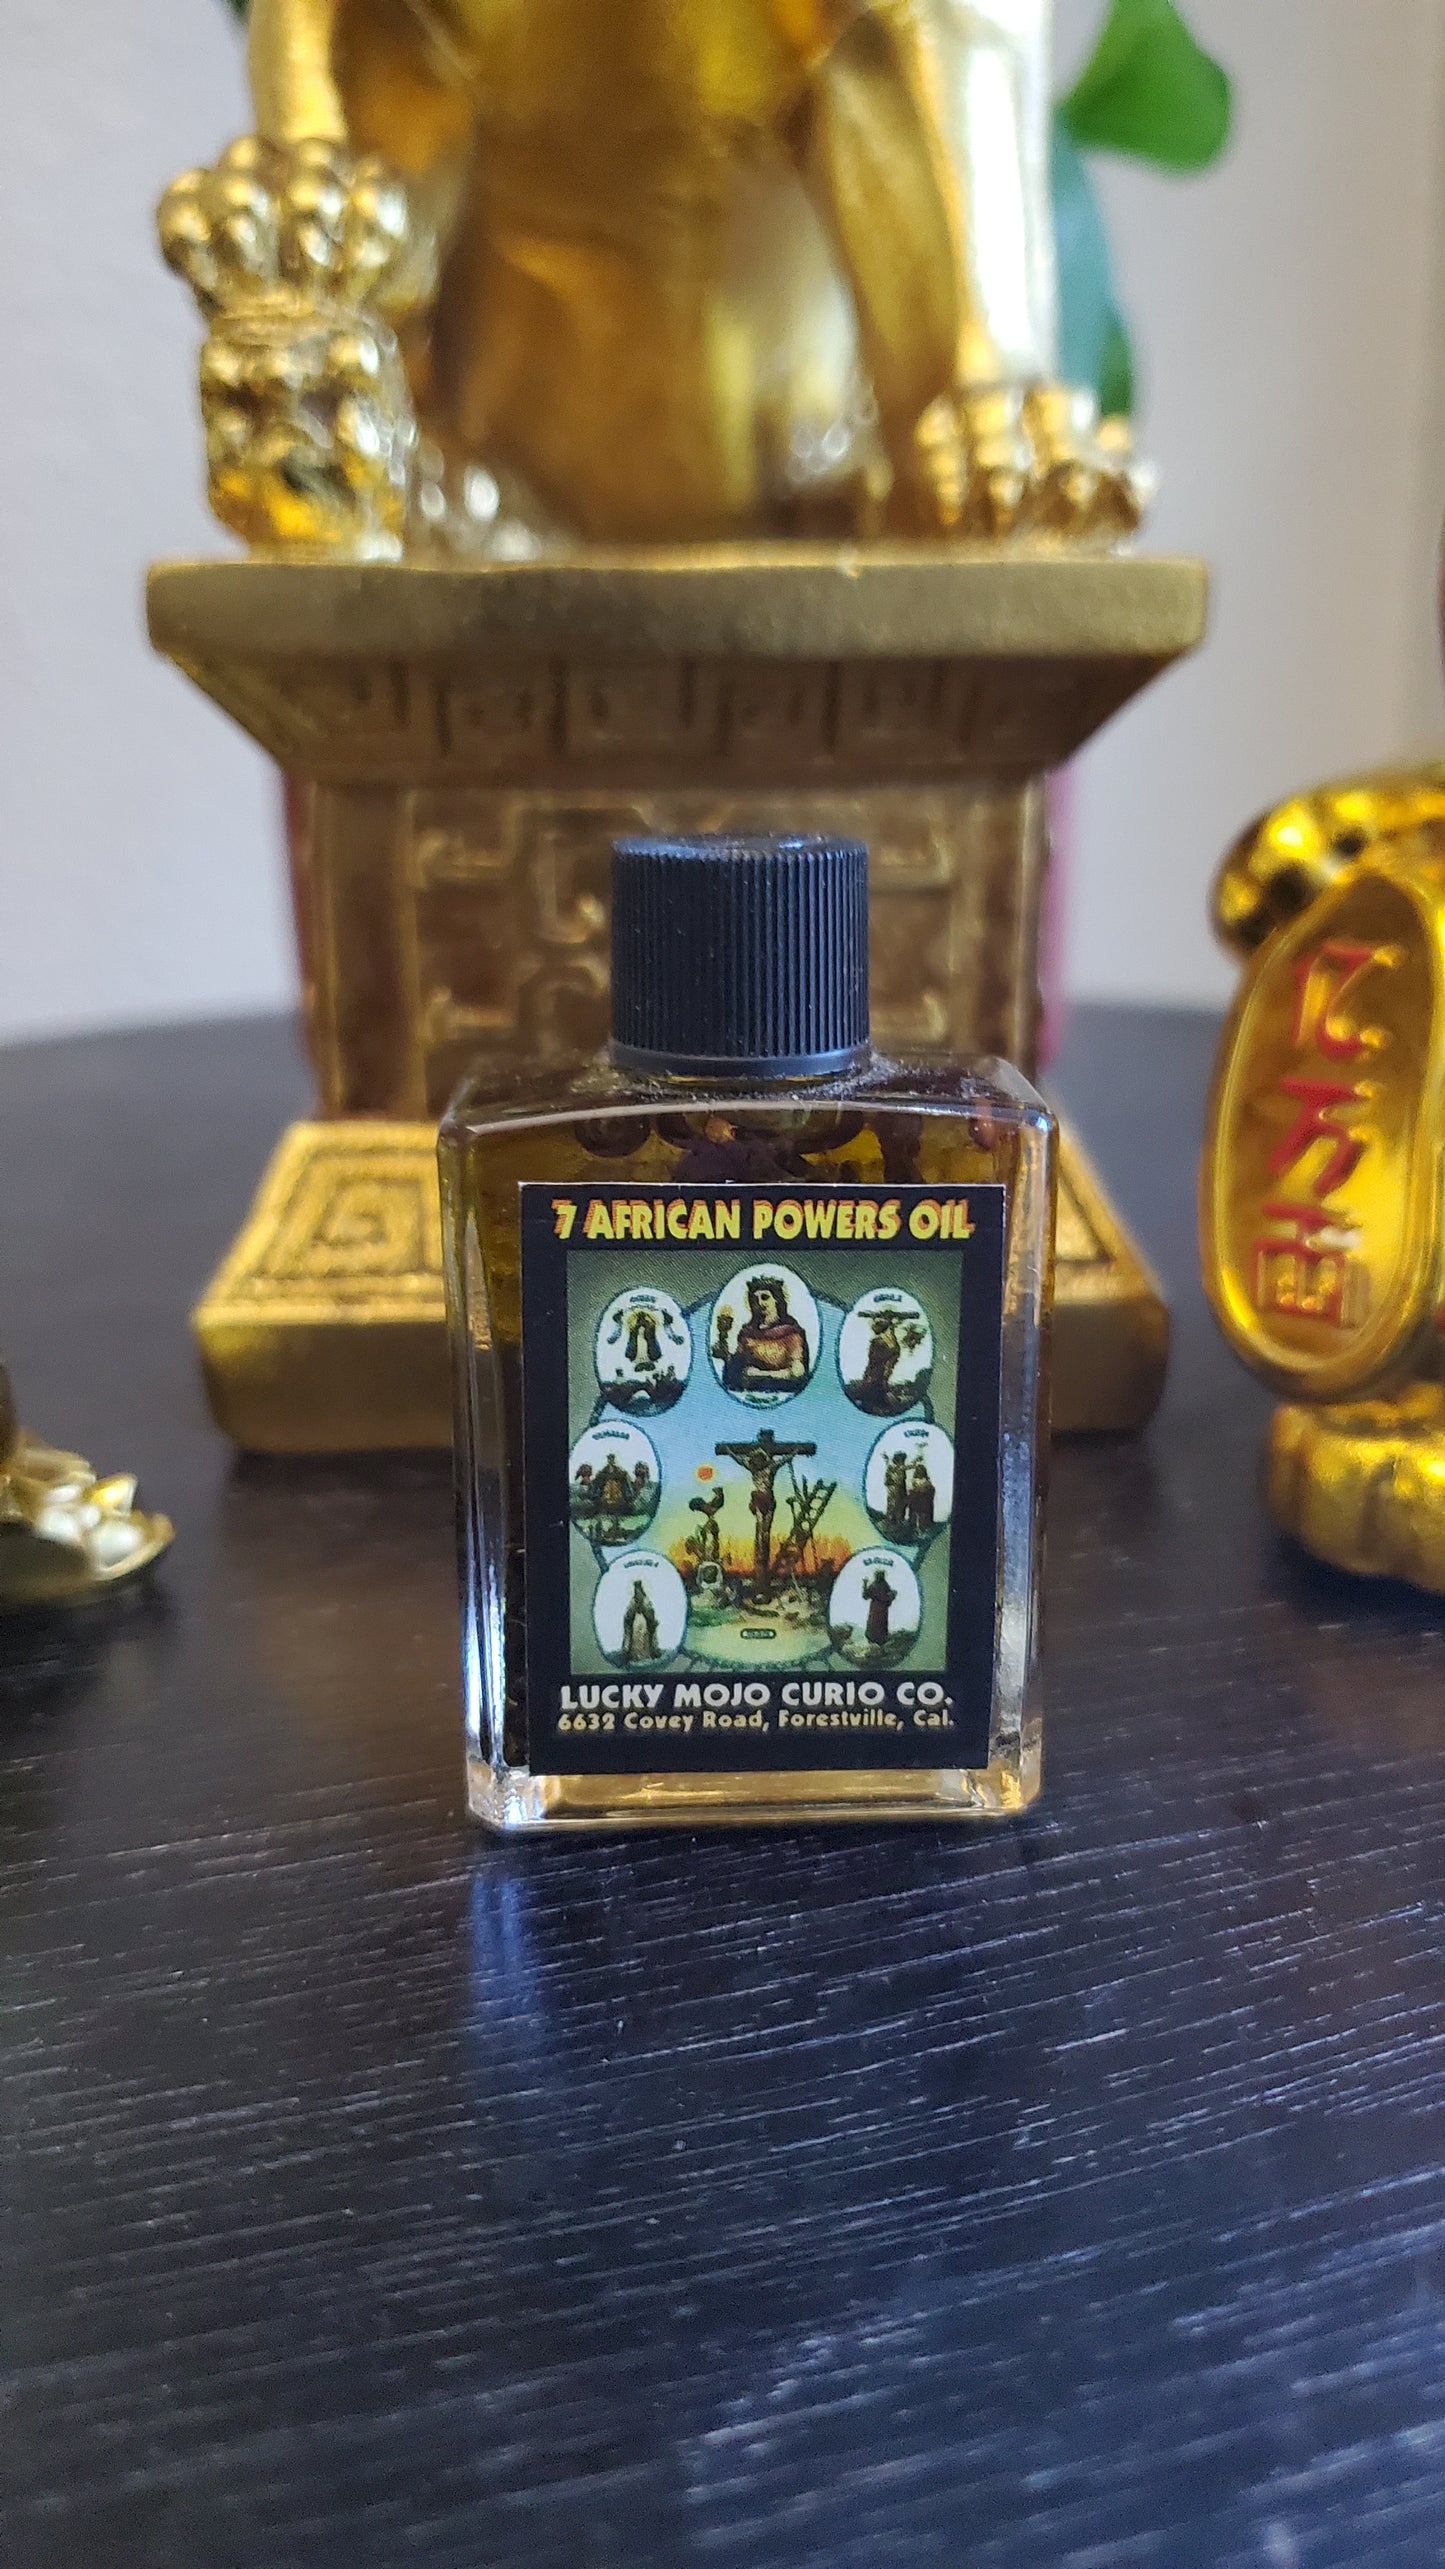 LuckyMojoCurioCo "Seven African Powers Oil" Anointing / Conjure Oil #Great Deal #LuckyMojoCurioCo #LuckyMojo #EffectiveOils #MoneyMagick